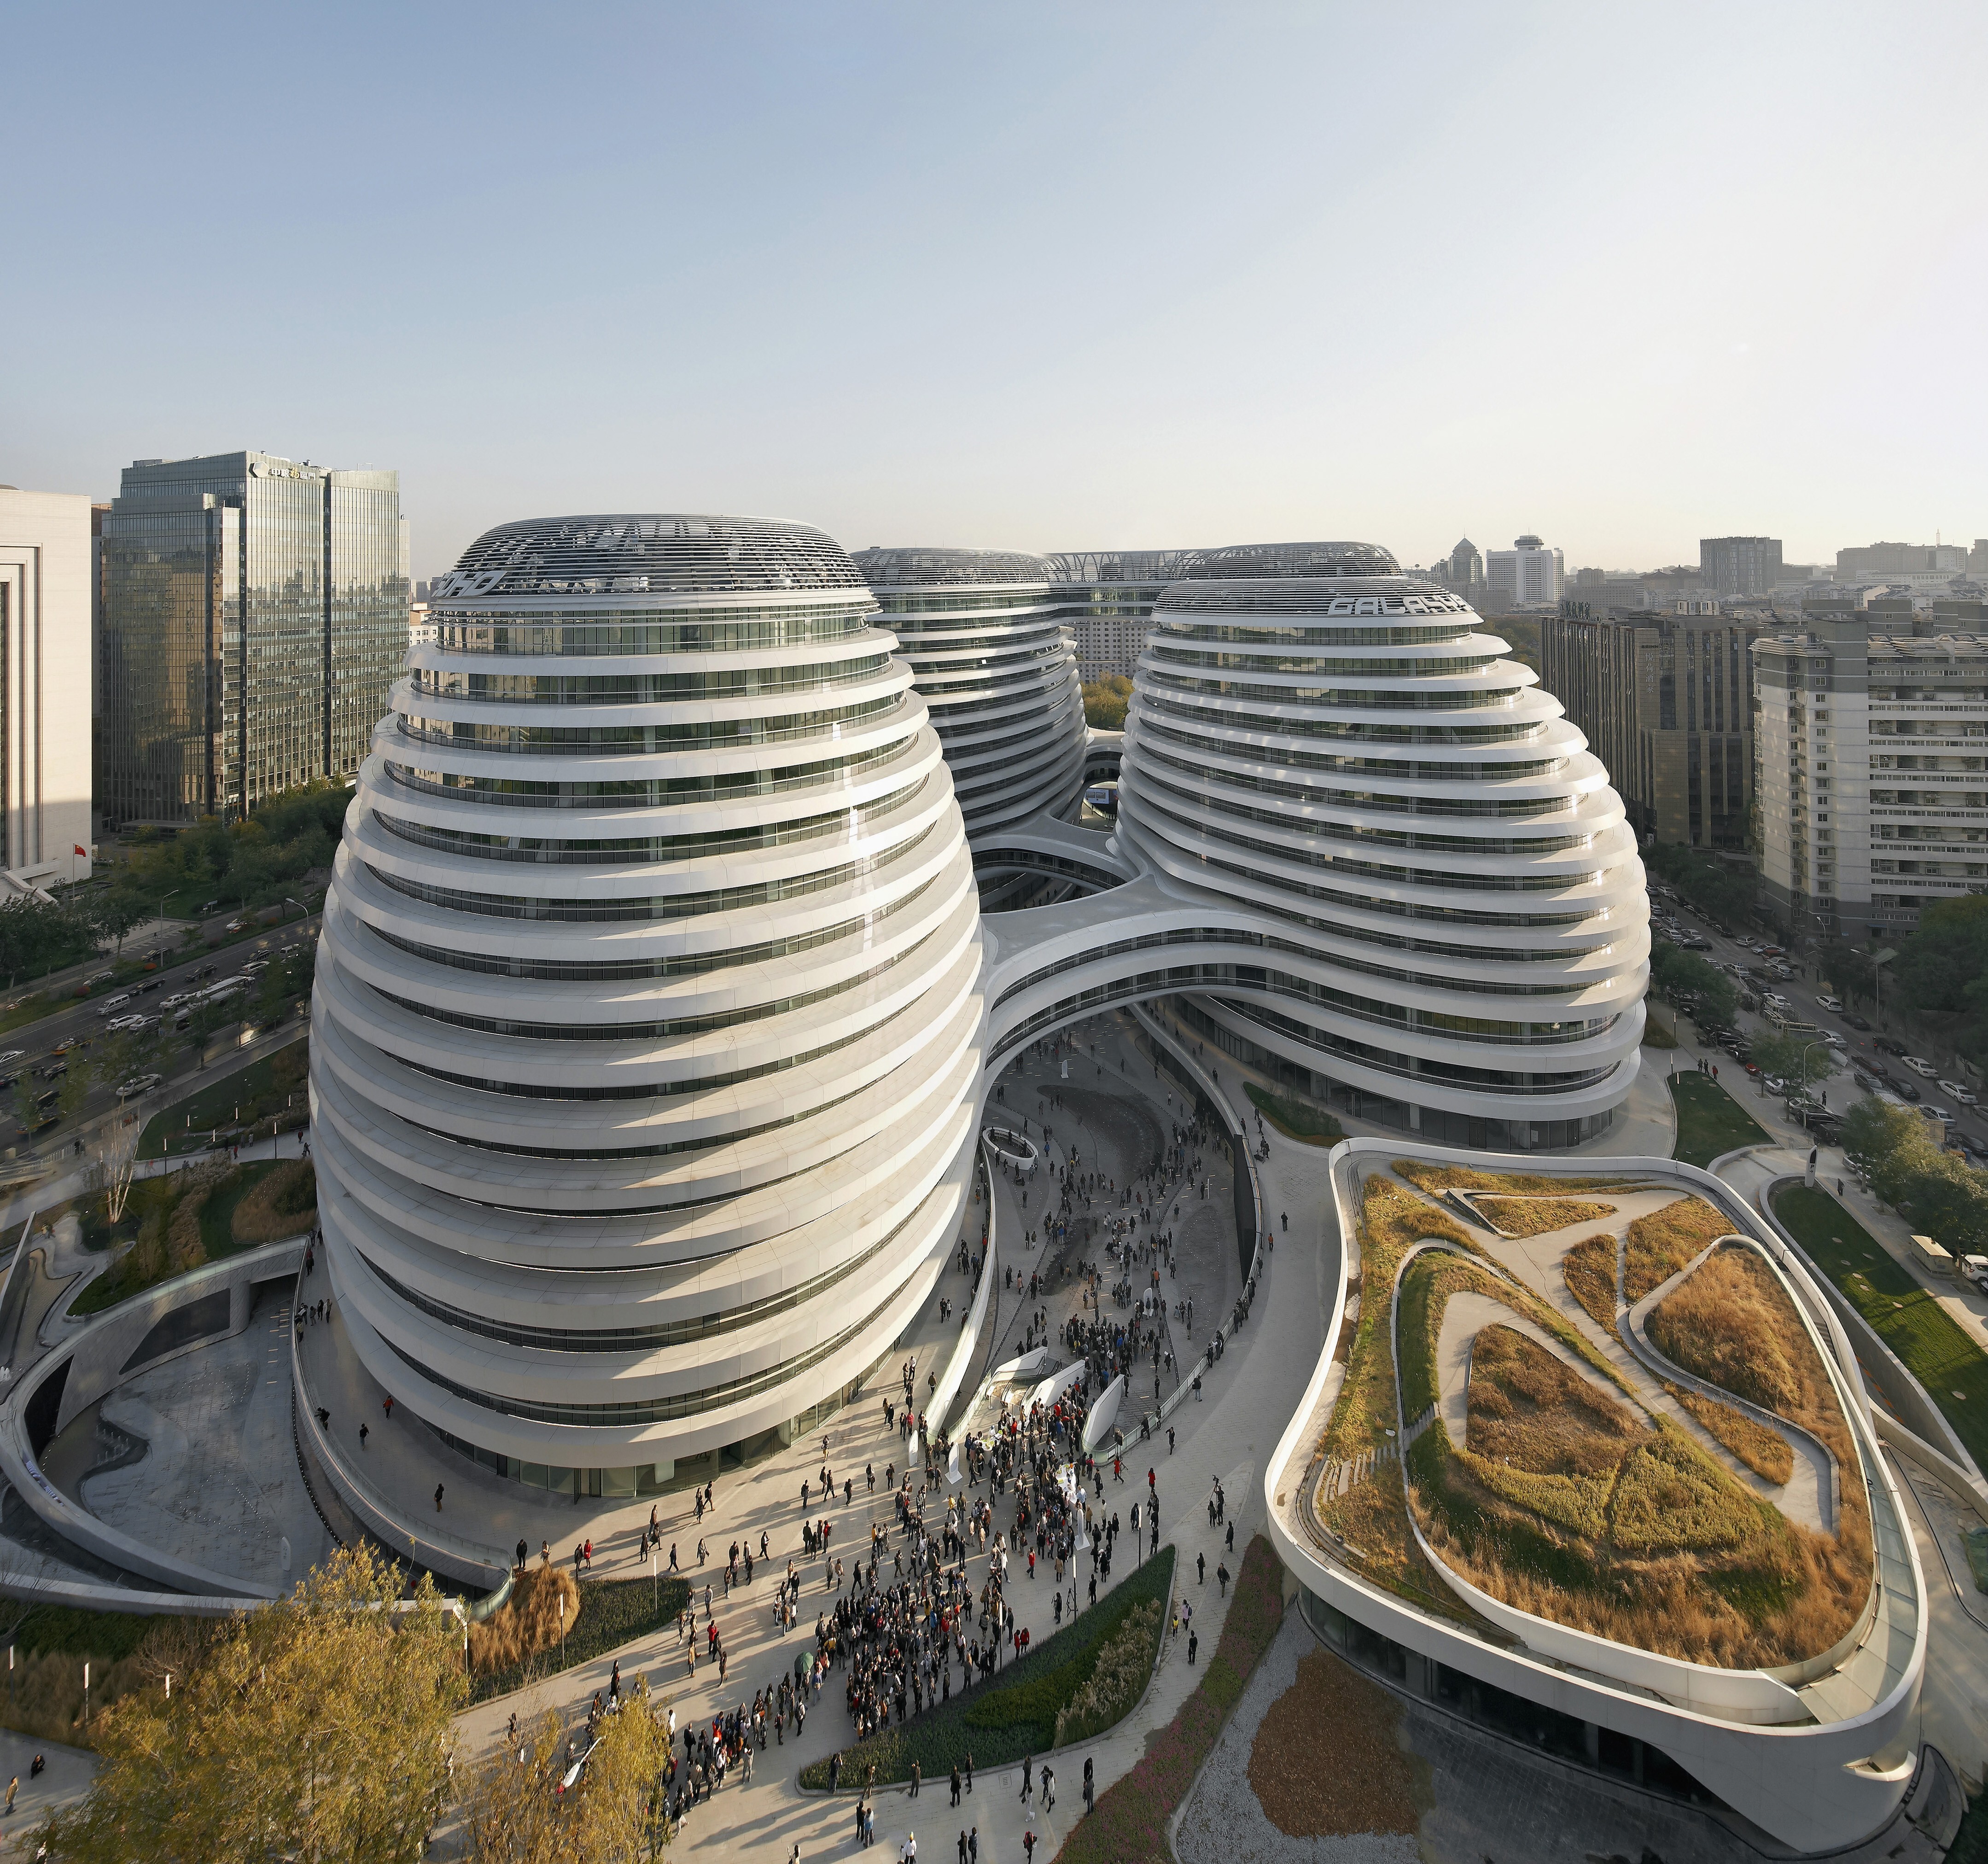 Galaxy Soho real estate project in Beijing, designed by Zaha Hadid Architects. Photo: Handout